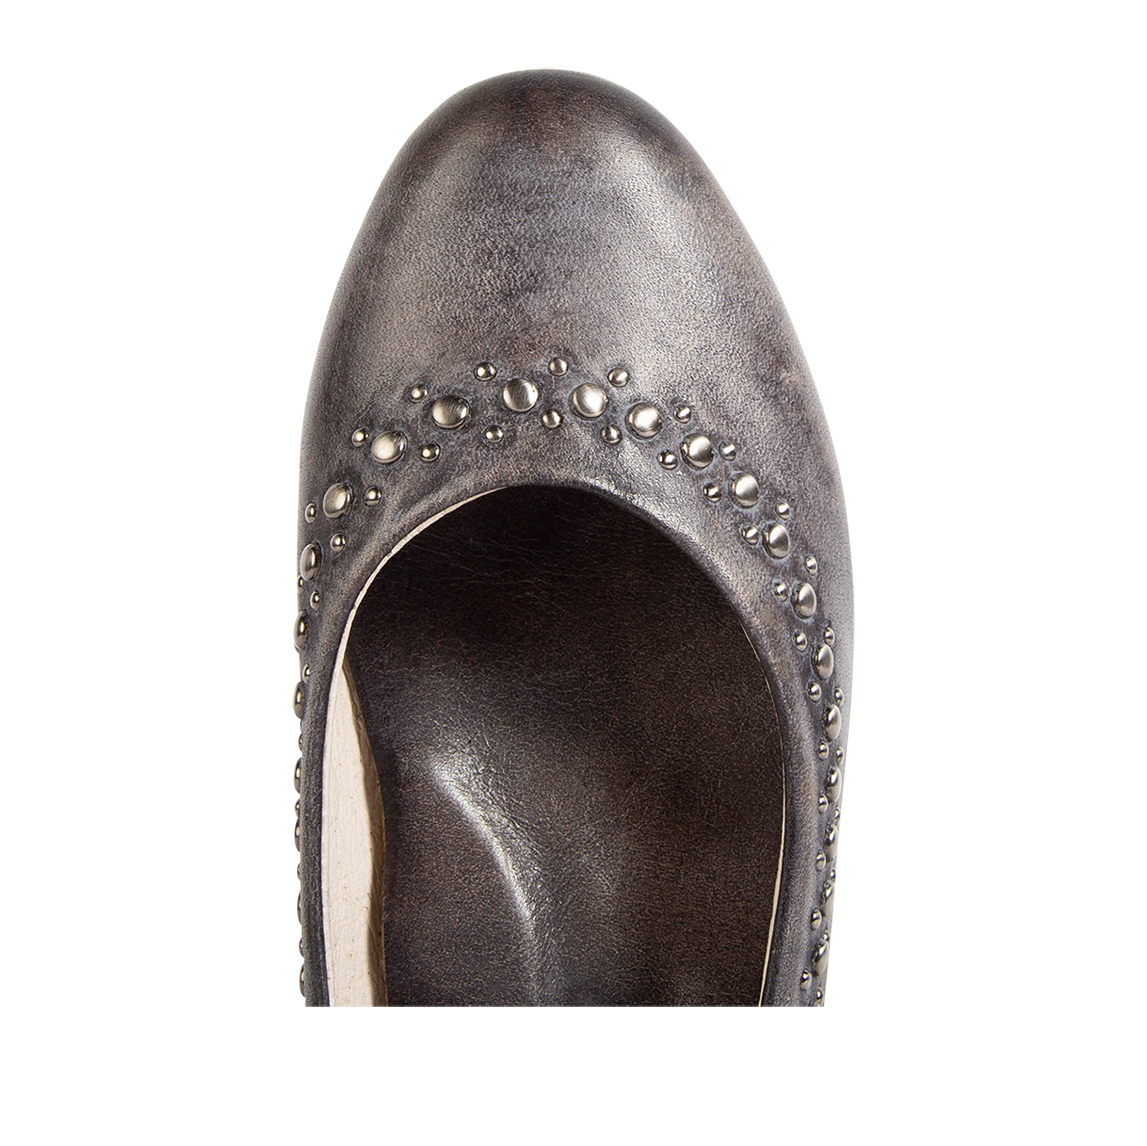 Top view showing round toe on FREEBIRD women's Blossom black multi ballet flat slip-on shoe featuring stud detailing a pointed toe